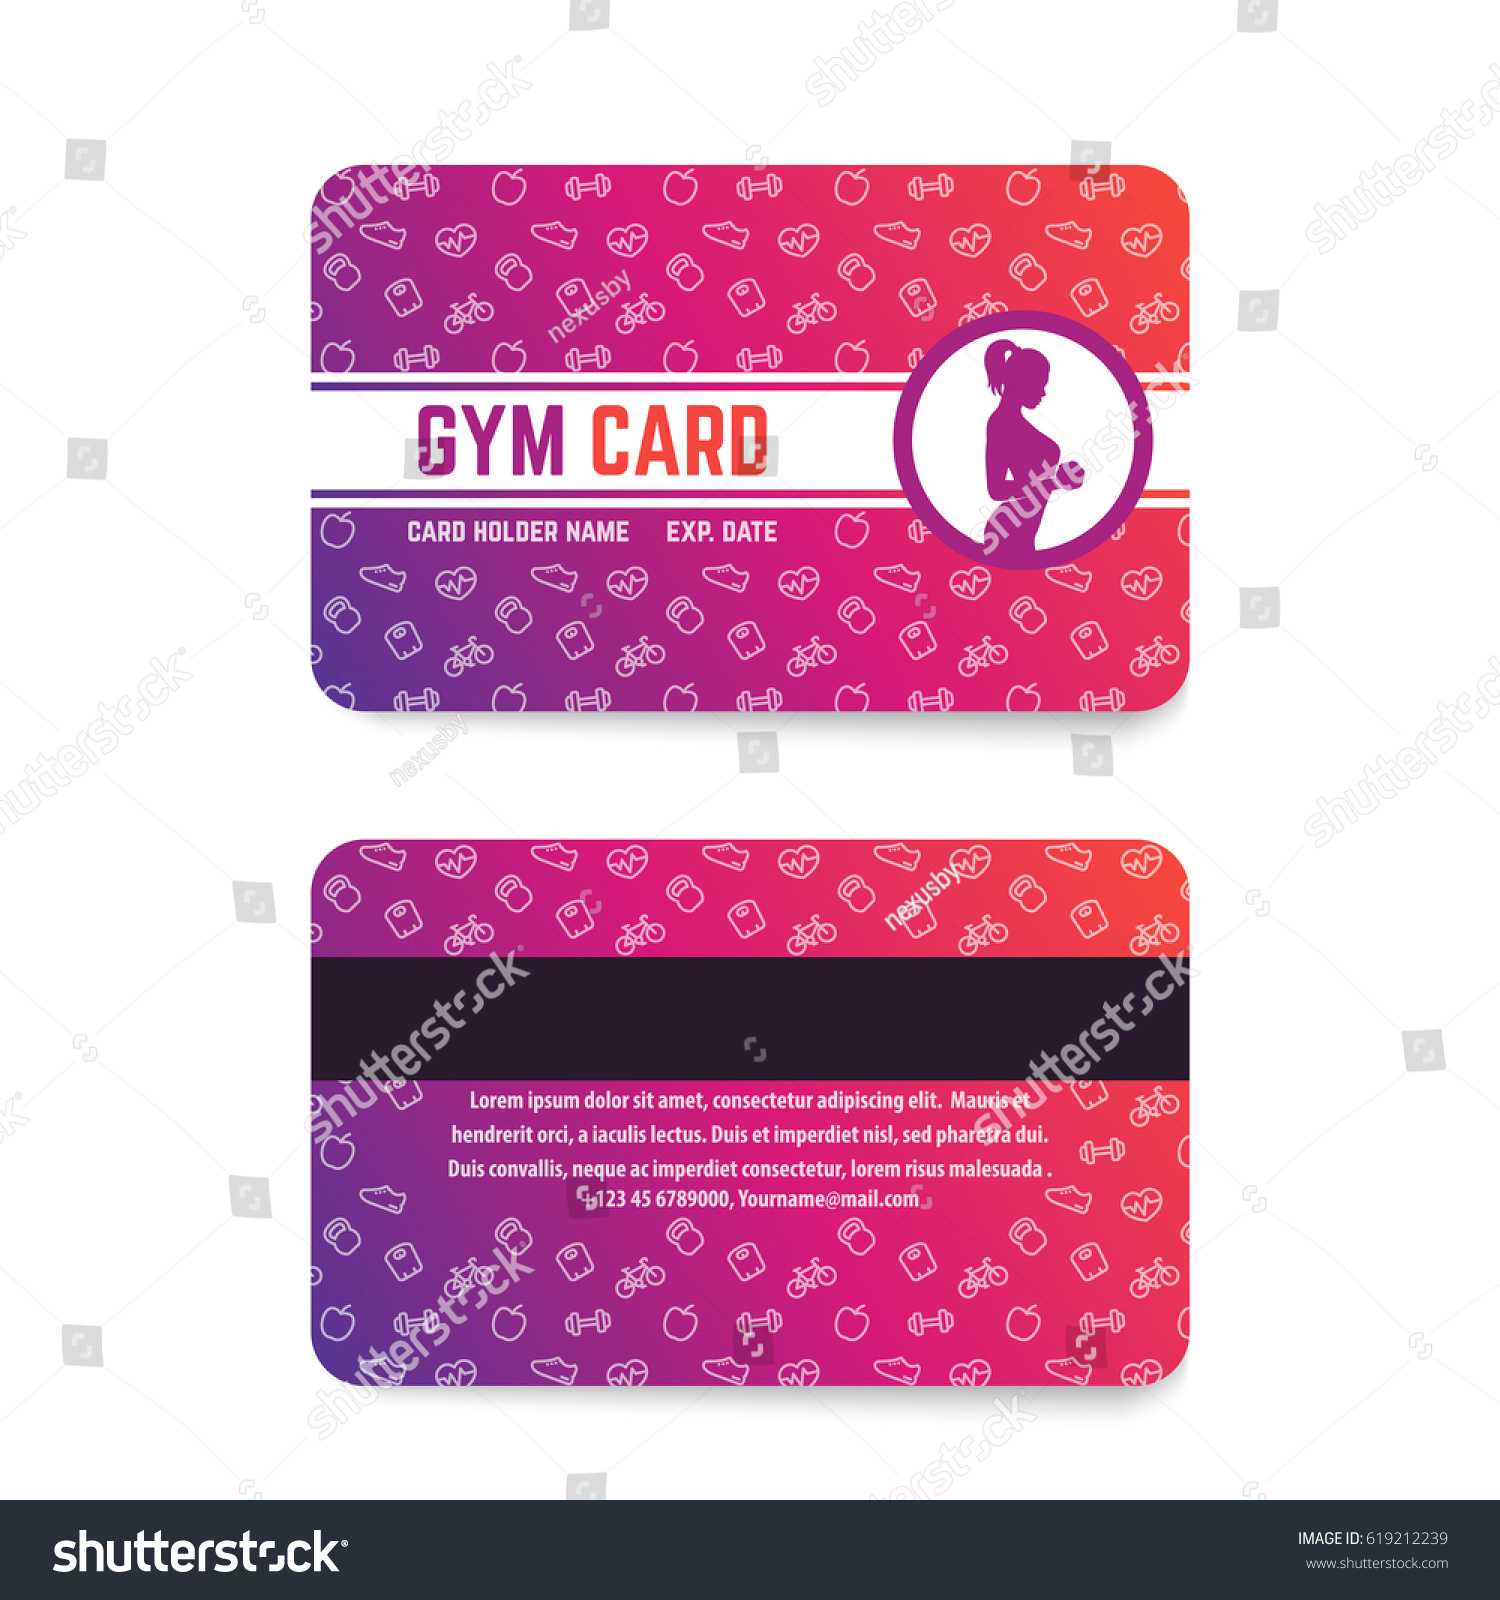 Fitness Club Gym Card Template Stock Vector (Royalty Free With Gym Membership Card Template